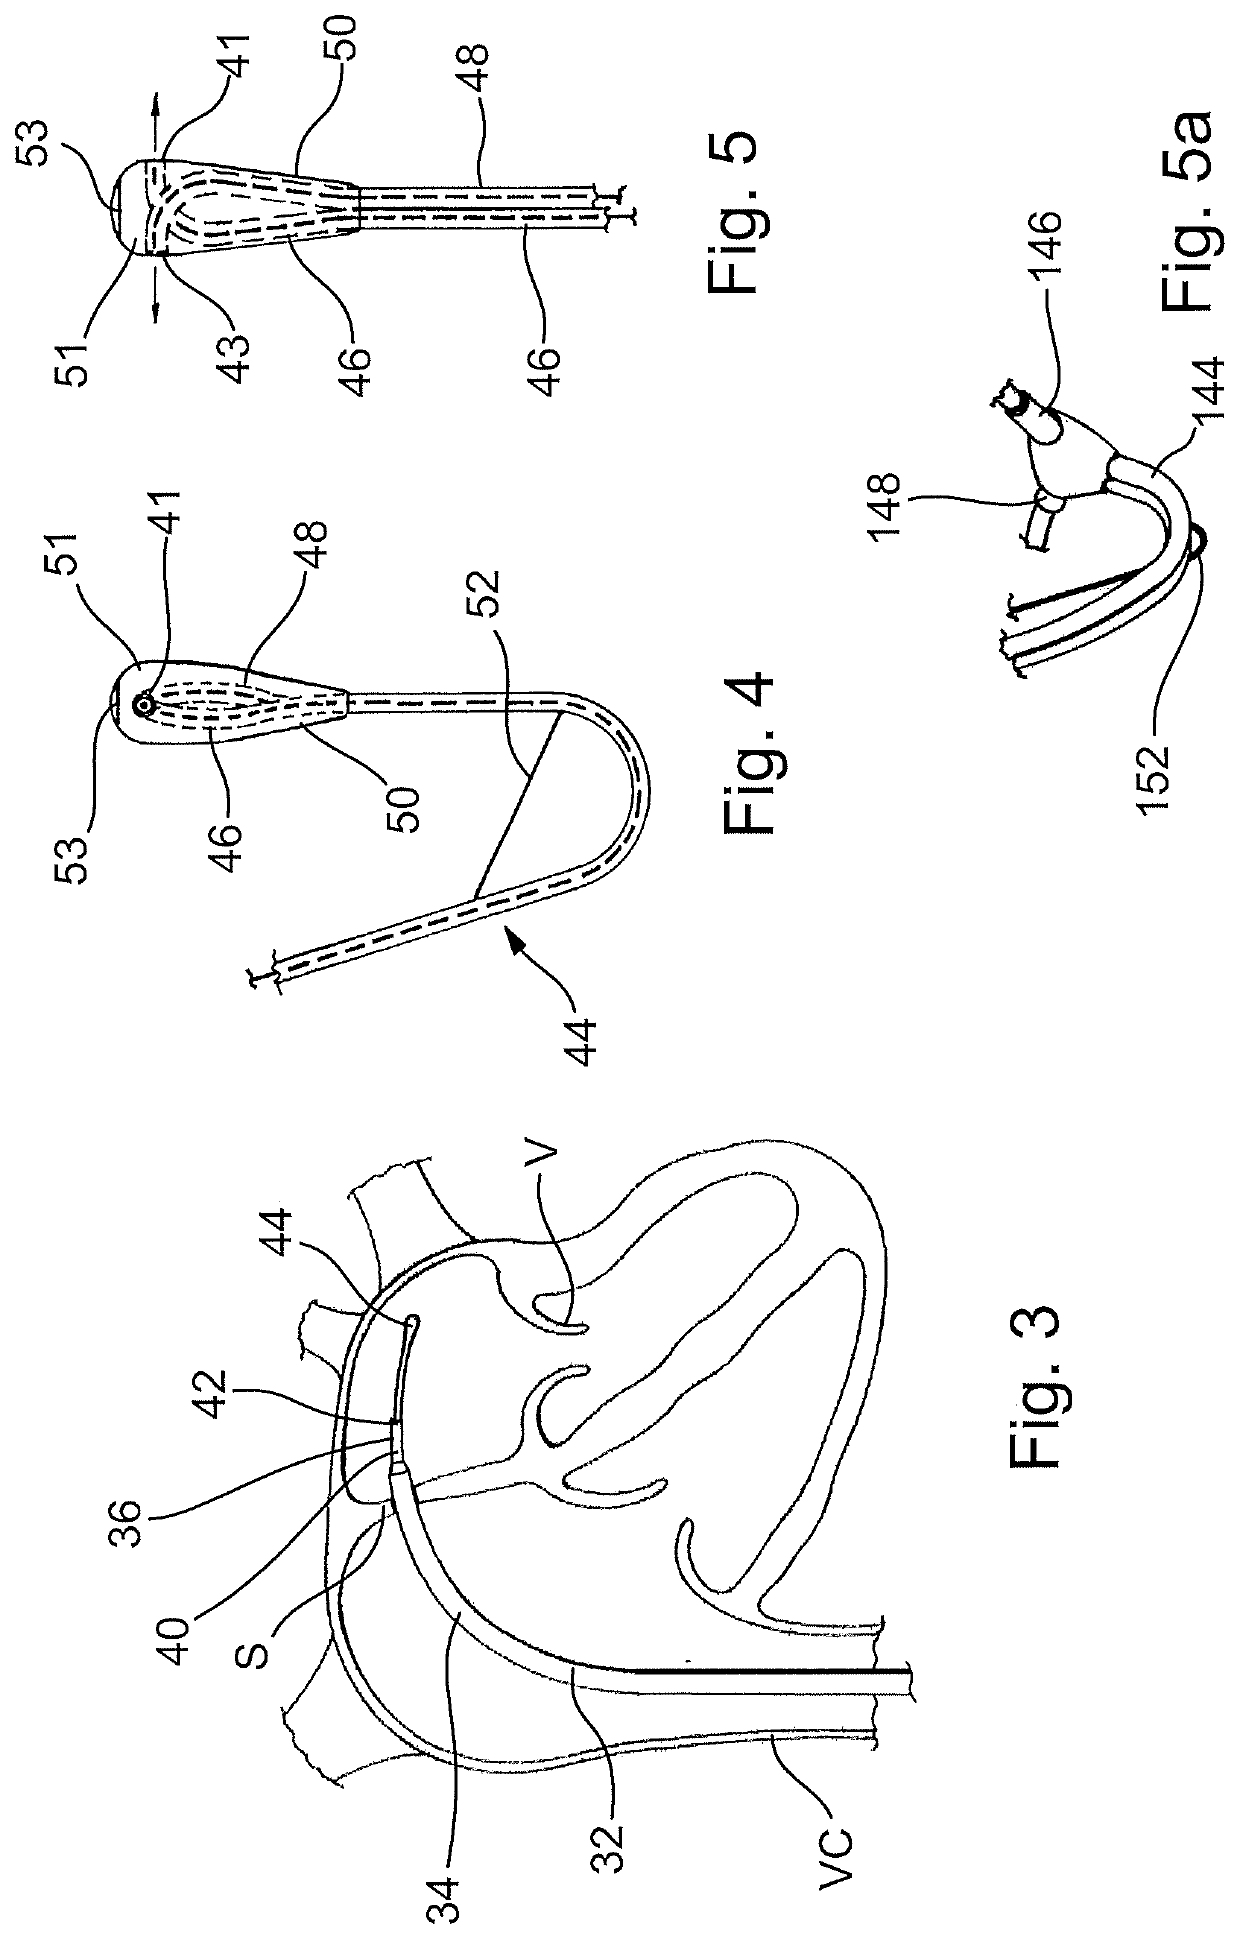 Device for implanting a prosthesis for a heart valve and assembly procedure